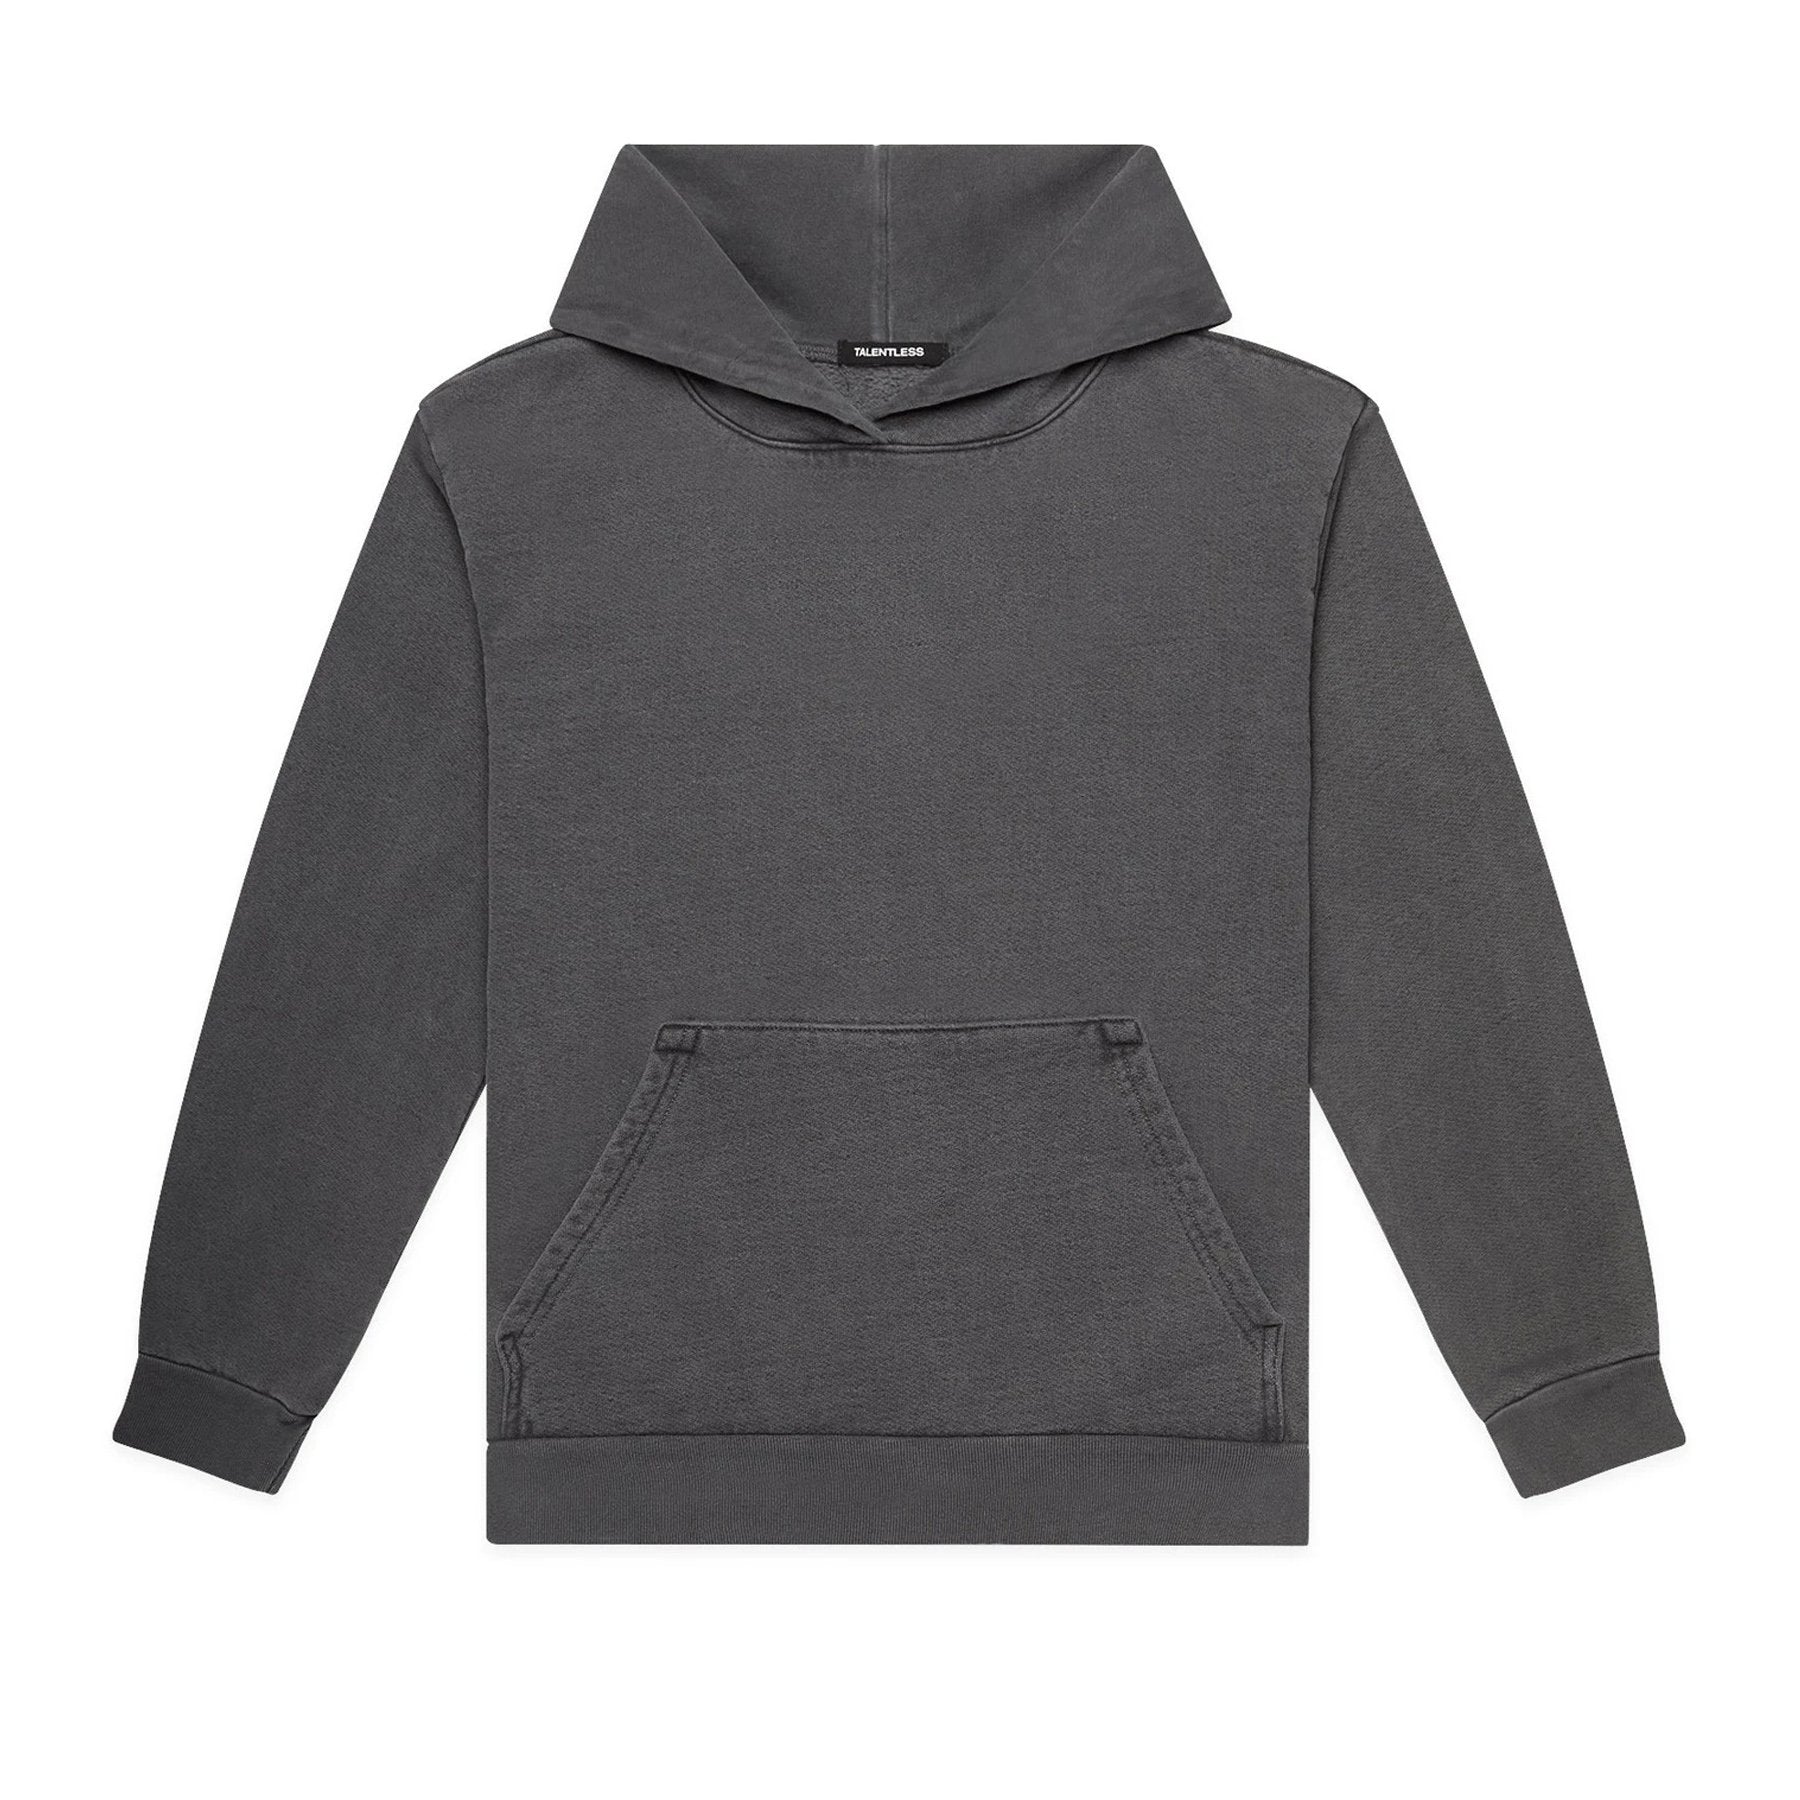 Soft & Warm 100% Ring Spun Super Combed Cotton Pullover Hoodie - Premium  300 GSM in Plain Hoodies